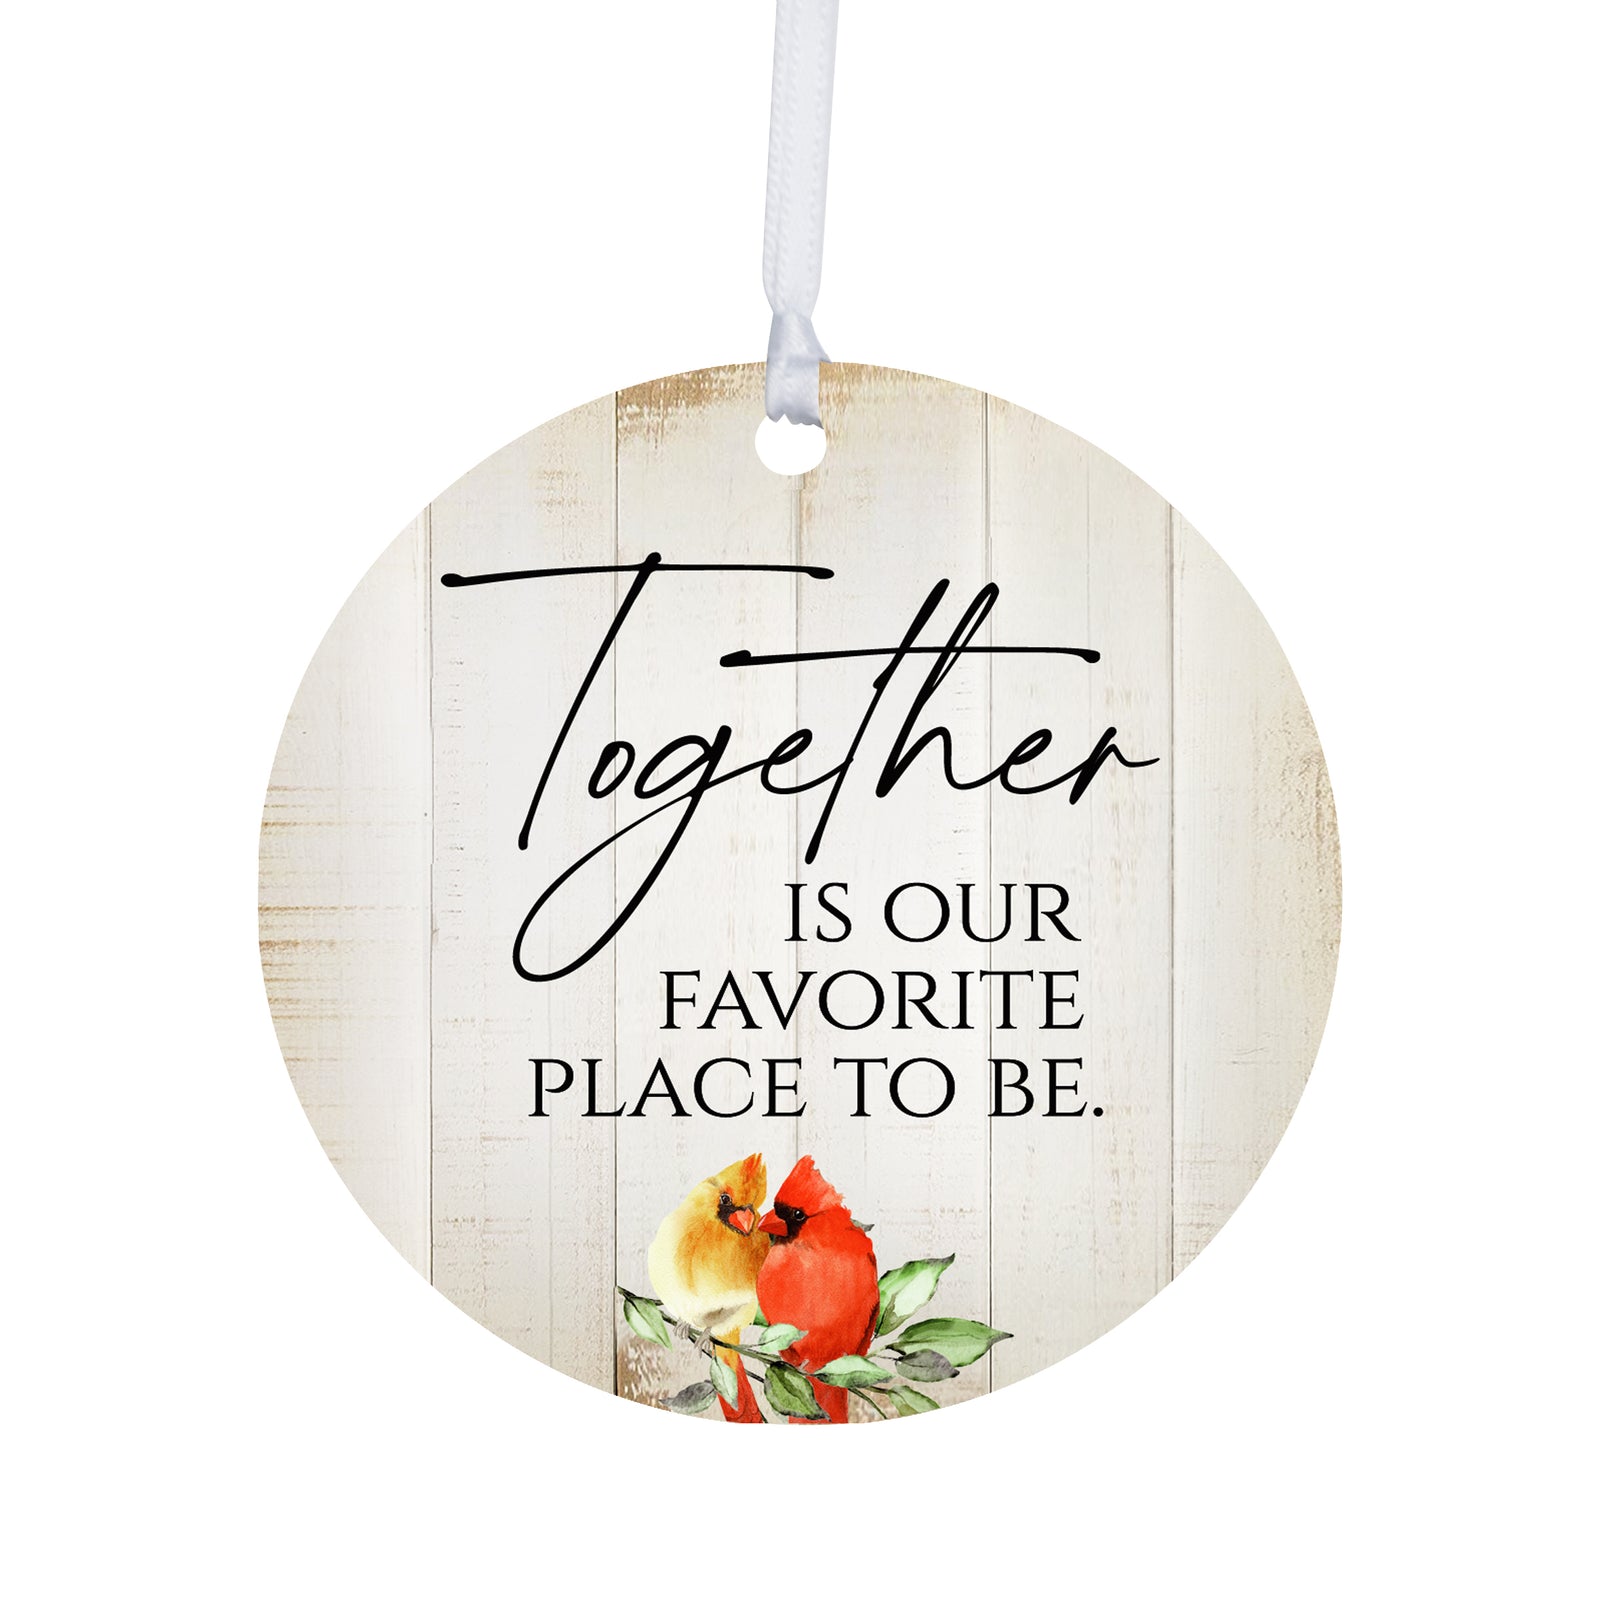 Vintage-Inspired Cardinal Ornament With Everyday Verses Gift Ideas - Together Is Our